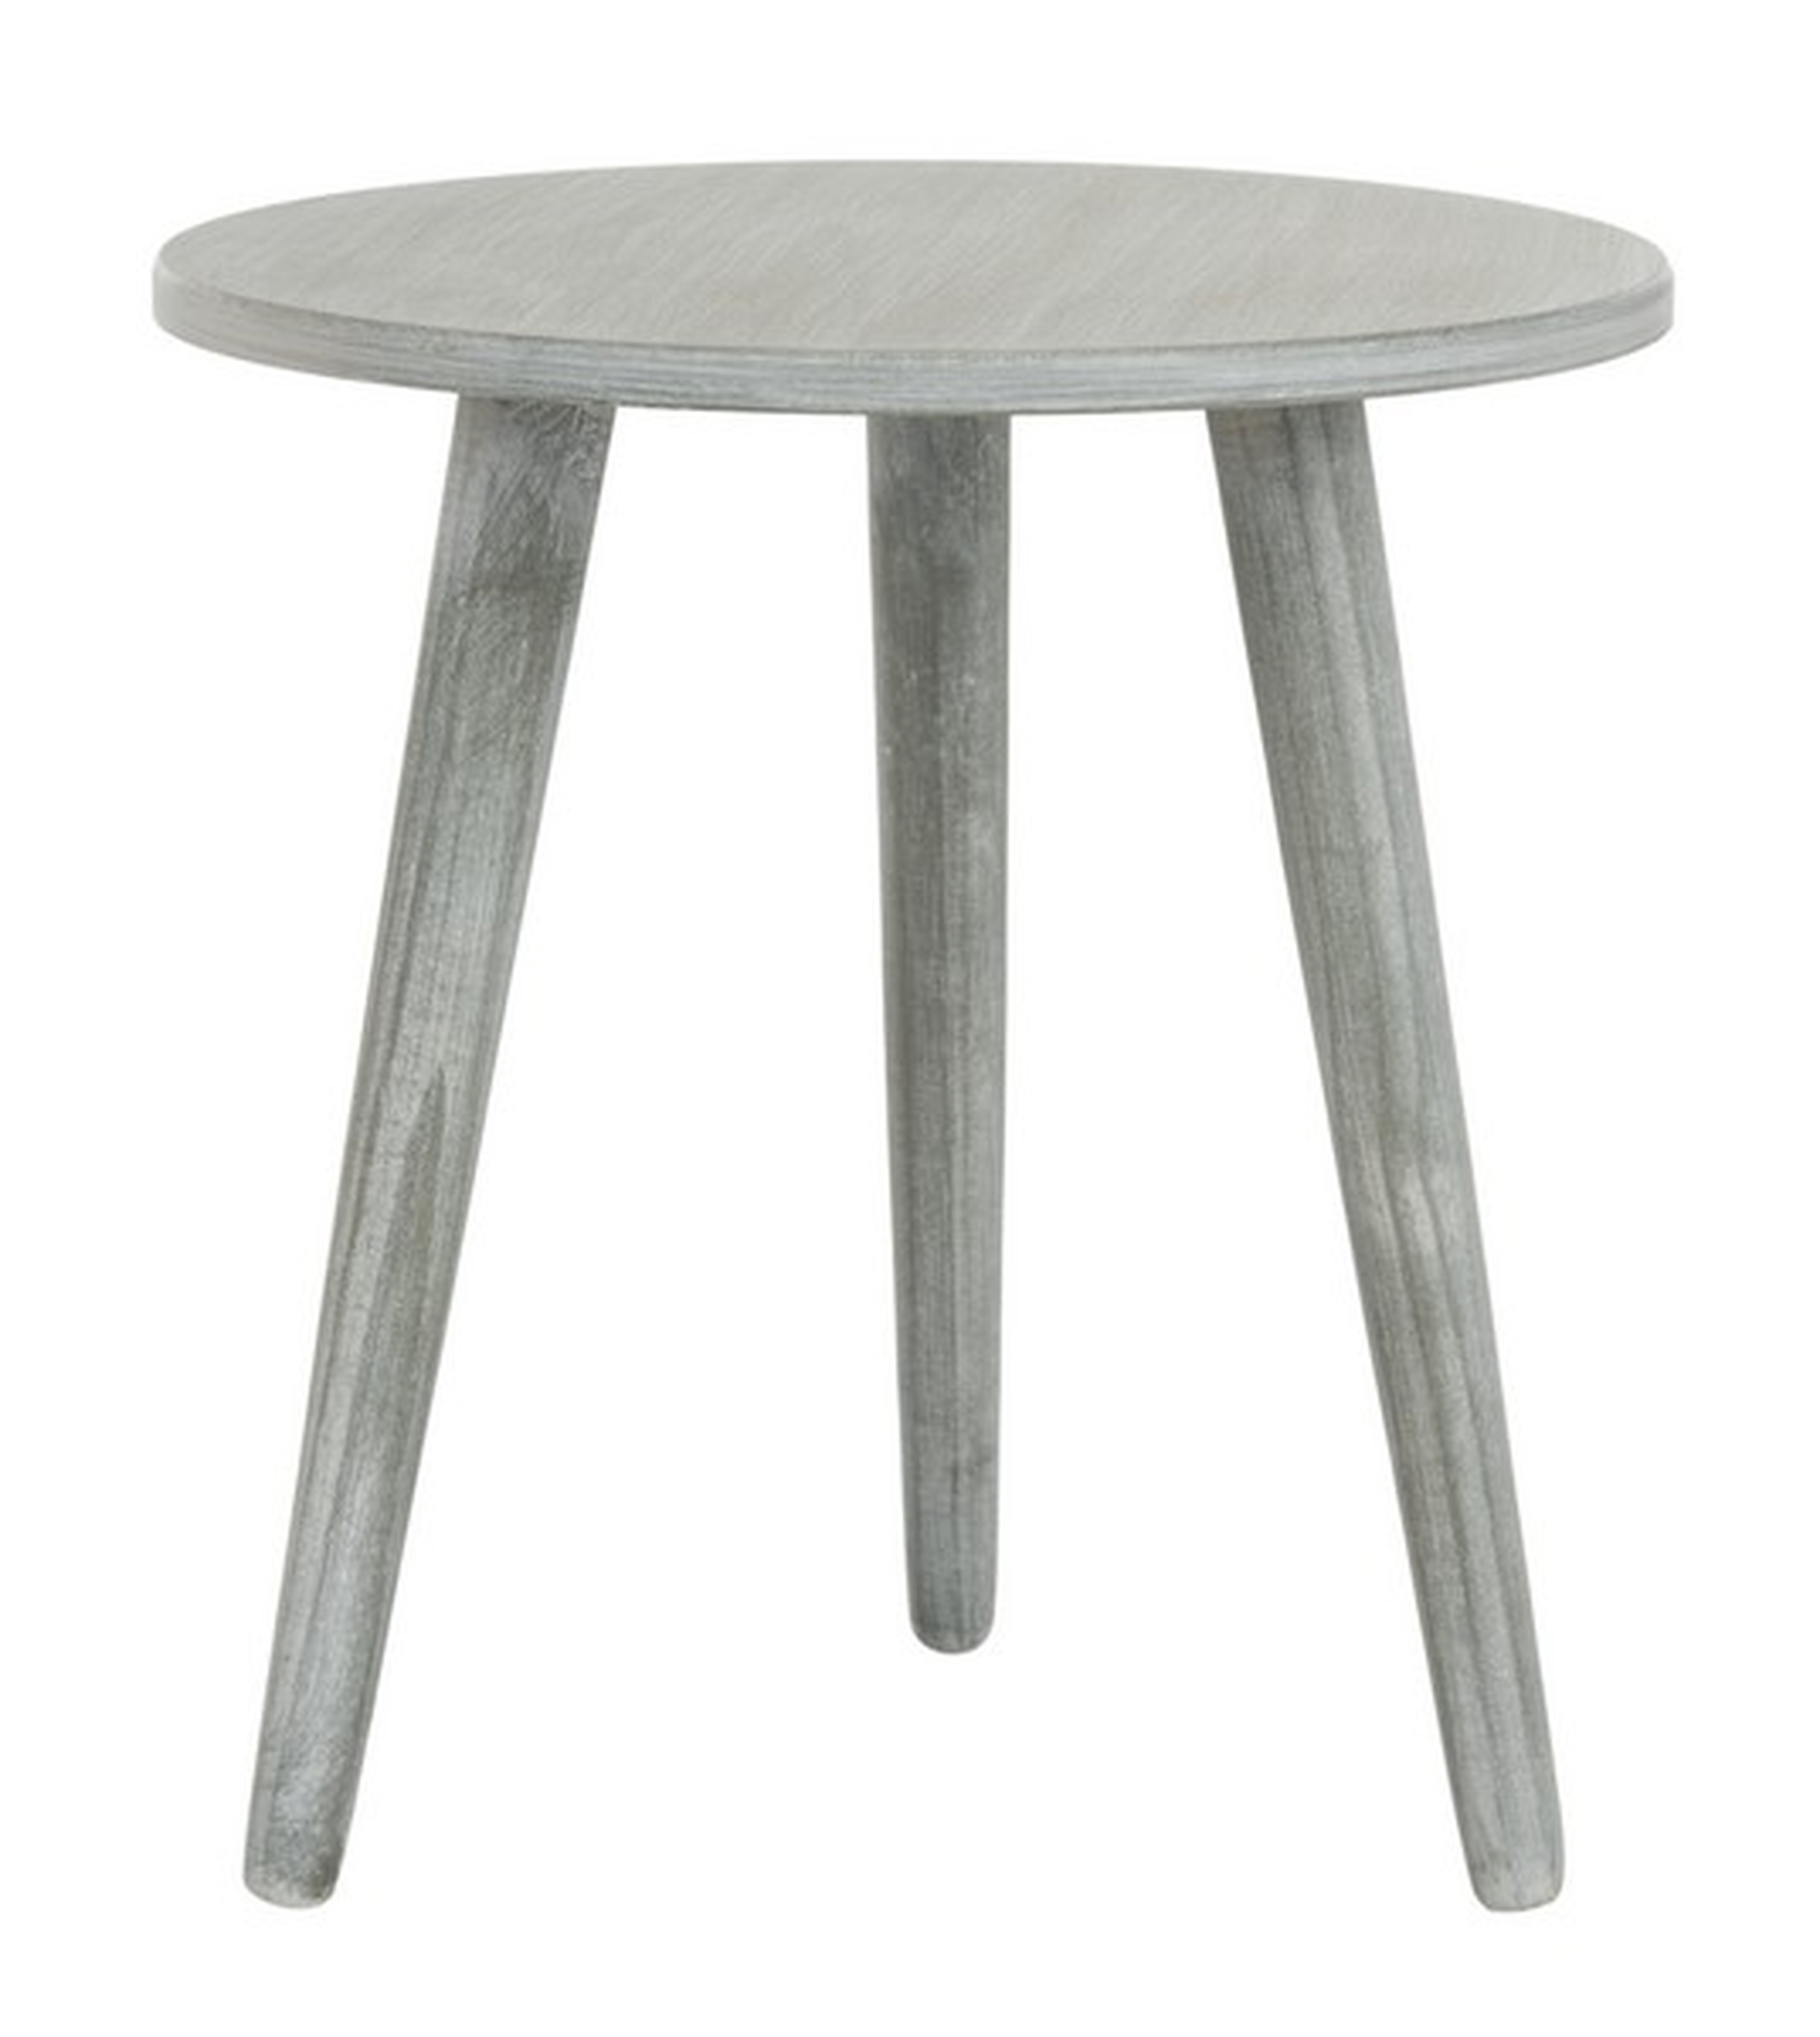 Orion Round Accent Table - Slate/Grey - Arlo Home - Arlo Home